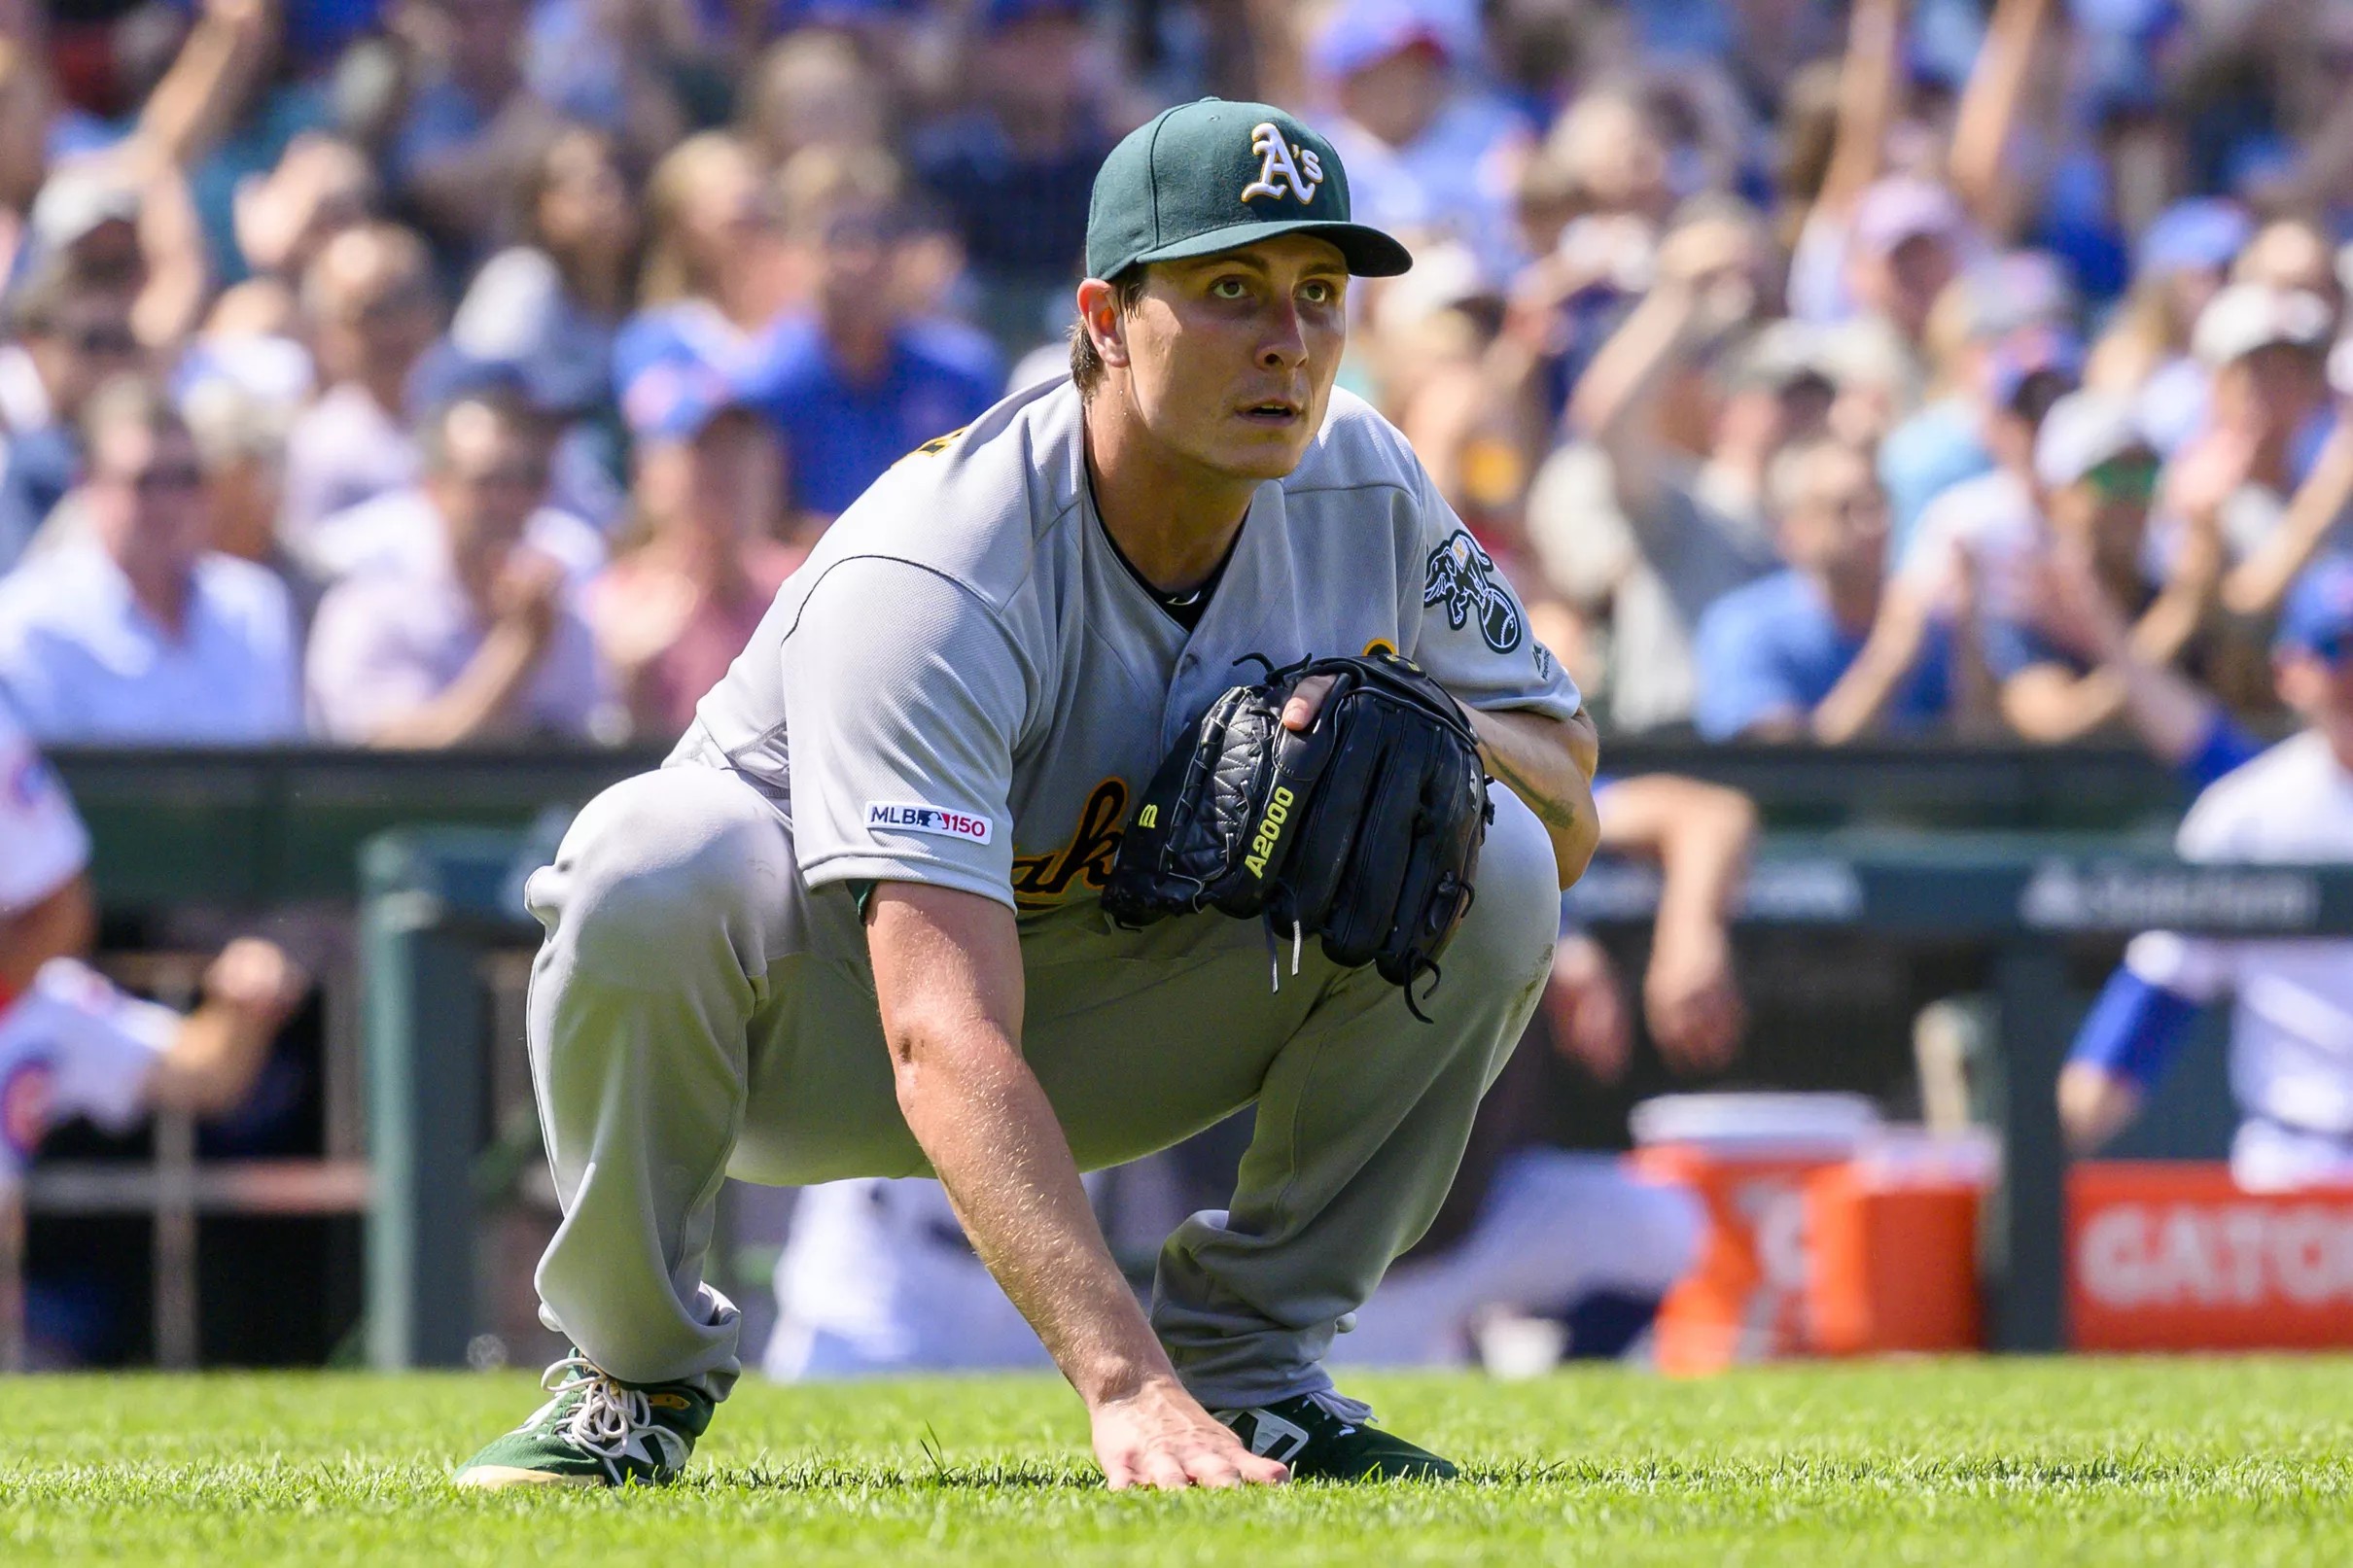 New York Yankees vs. Oakland Athletics Series Preview